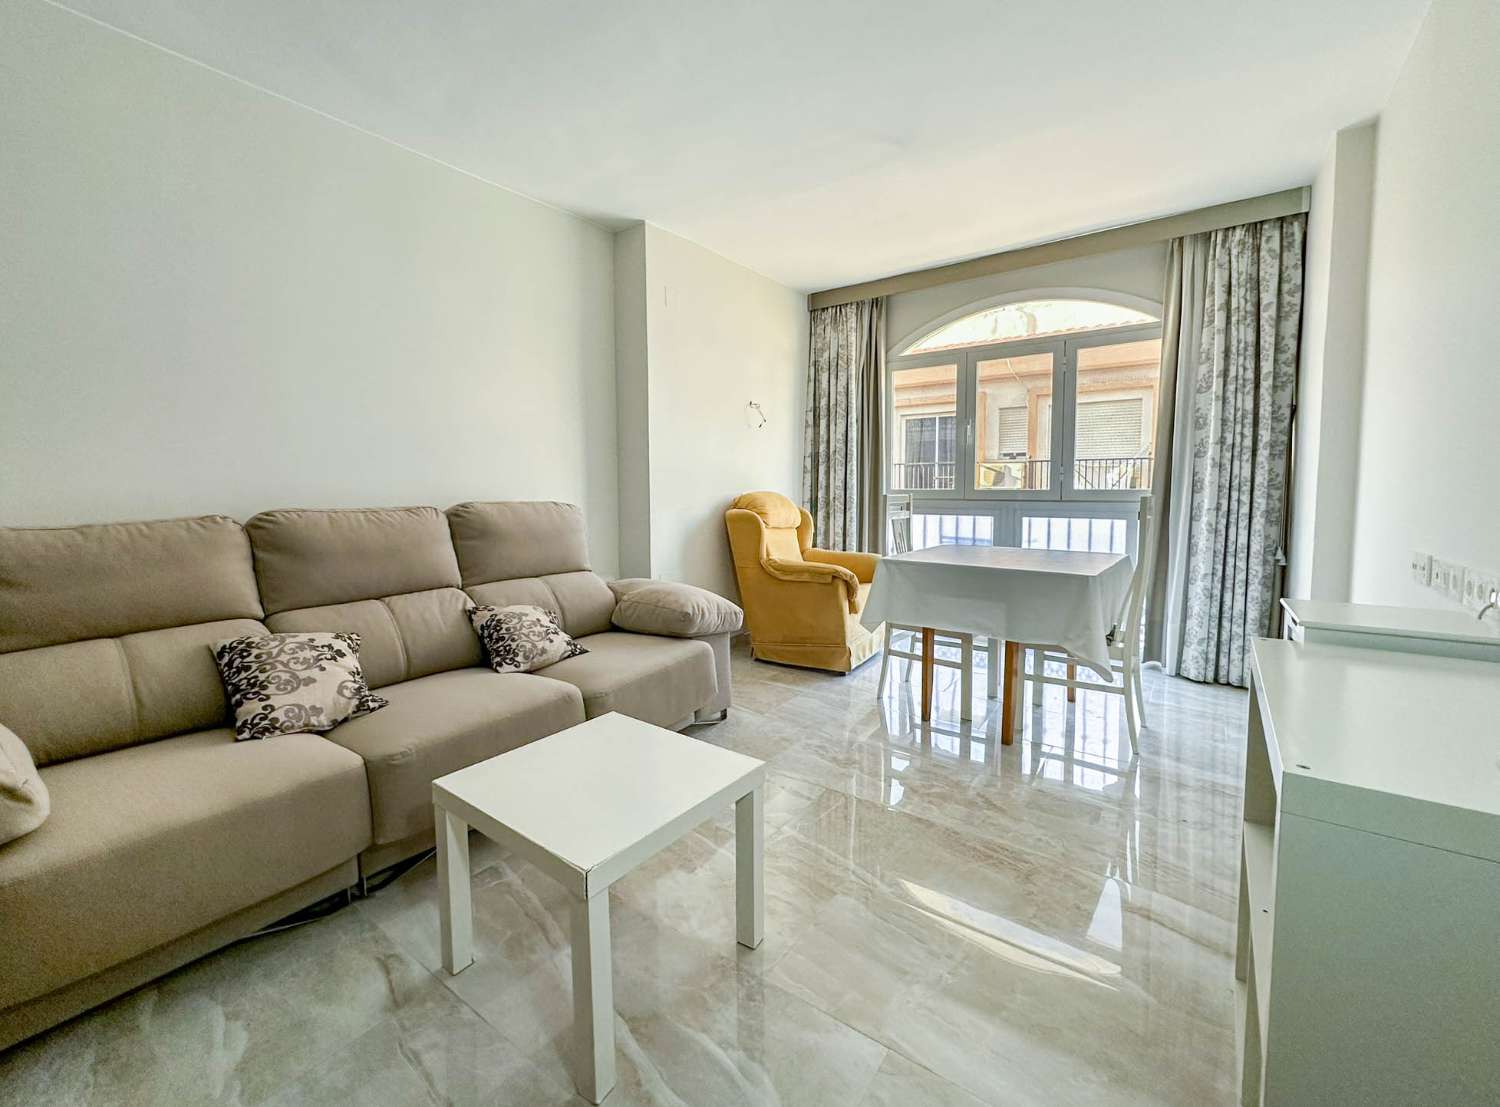 Beautiful renovated apartment for sale in the center of Salobrena